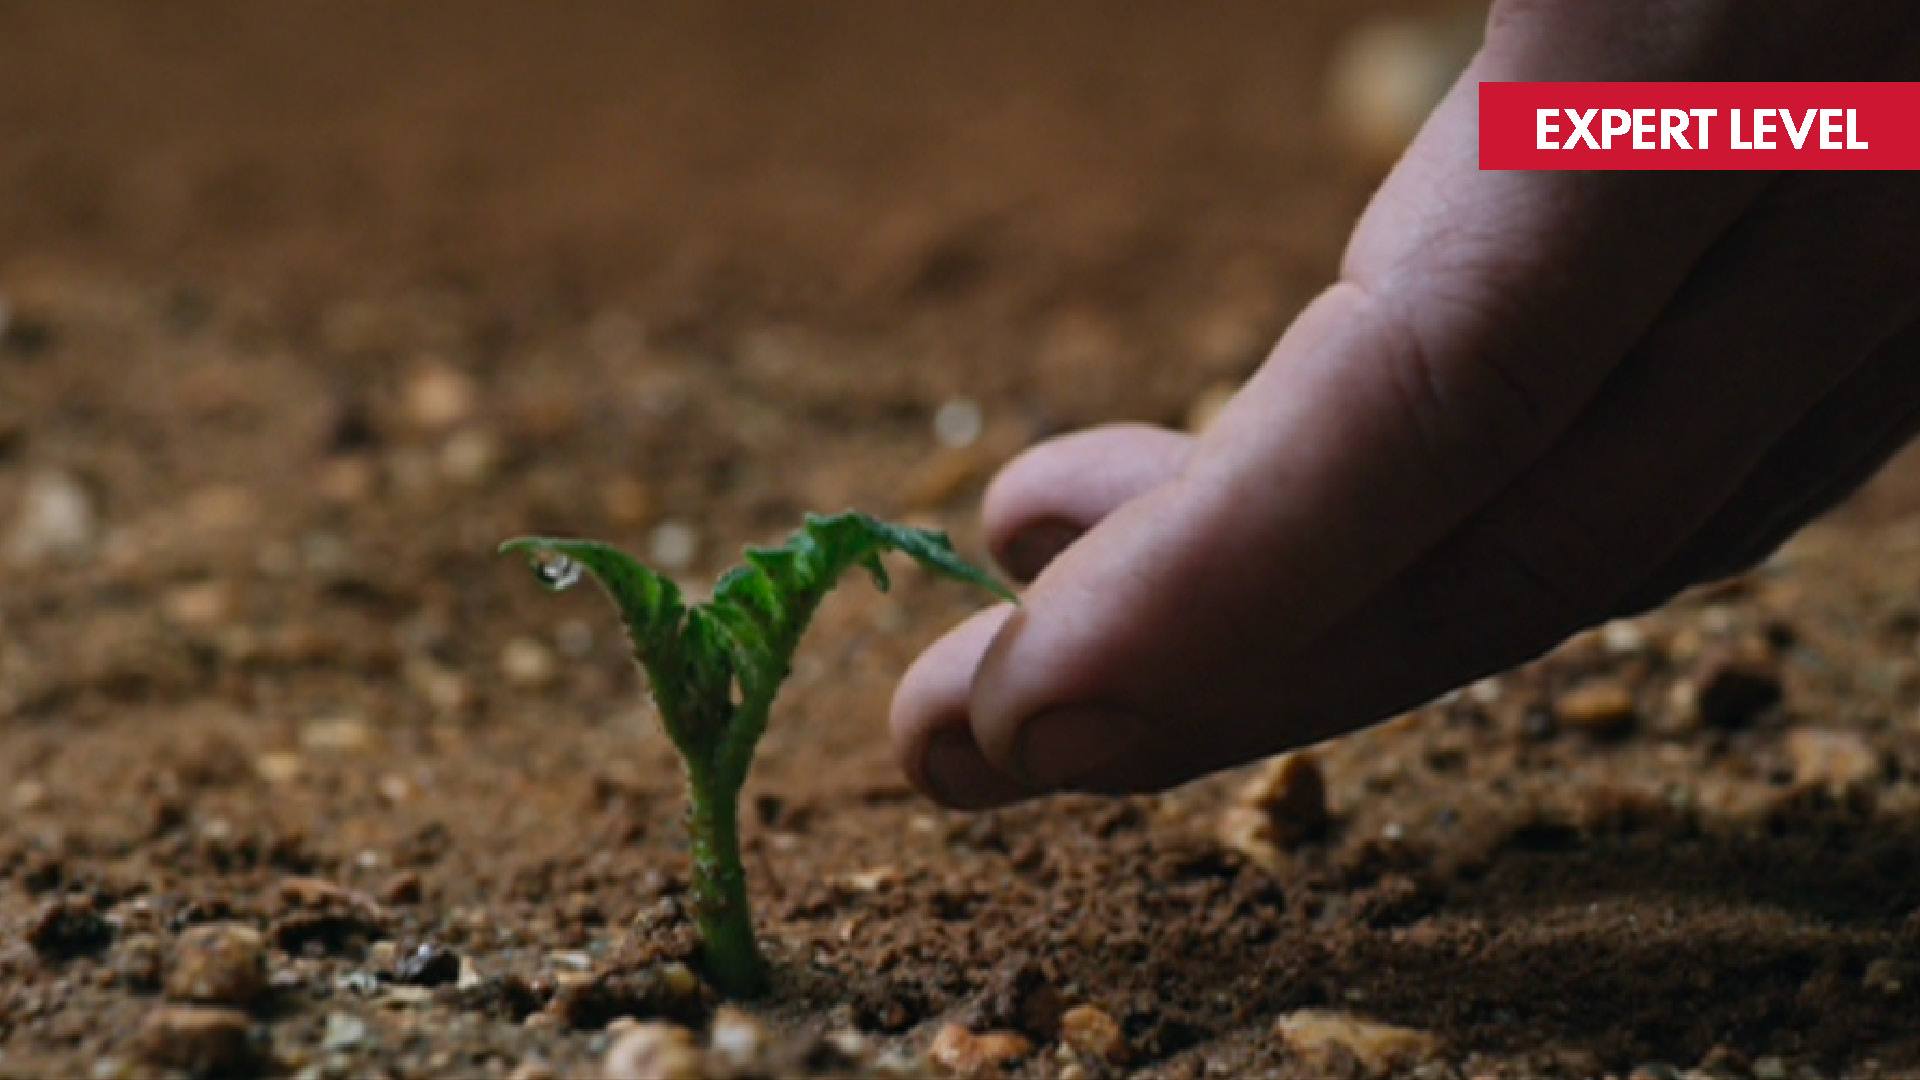 THE MARTIAN film still of a plant sprout